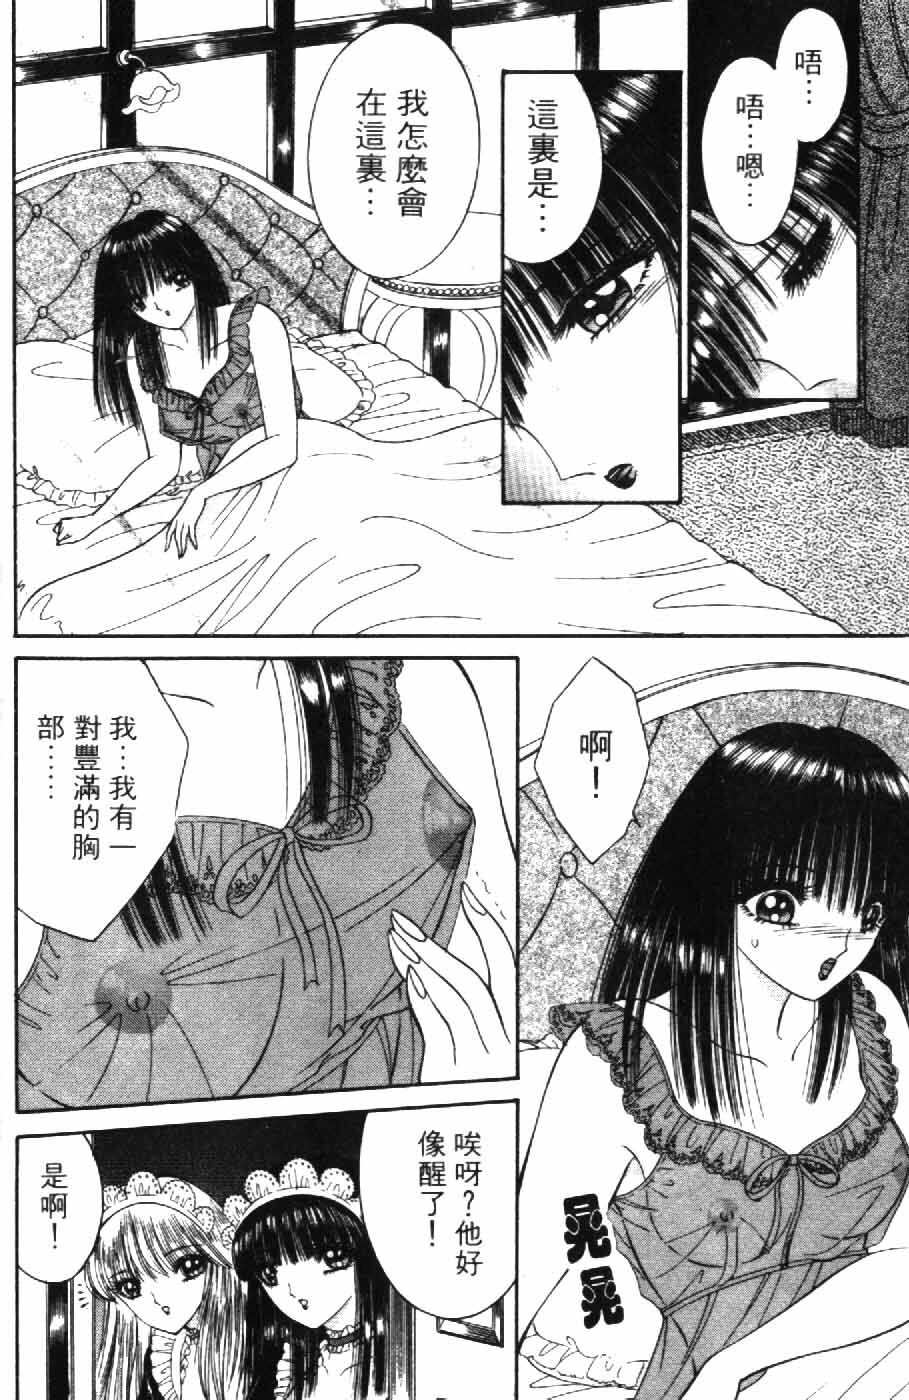 [Senno Knife] Ouma ga Horror Show 2 - Trans Sexual Special Show 2 | 顫慄博覽會 2 [Chinese] page 18 full